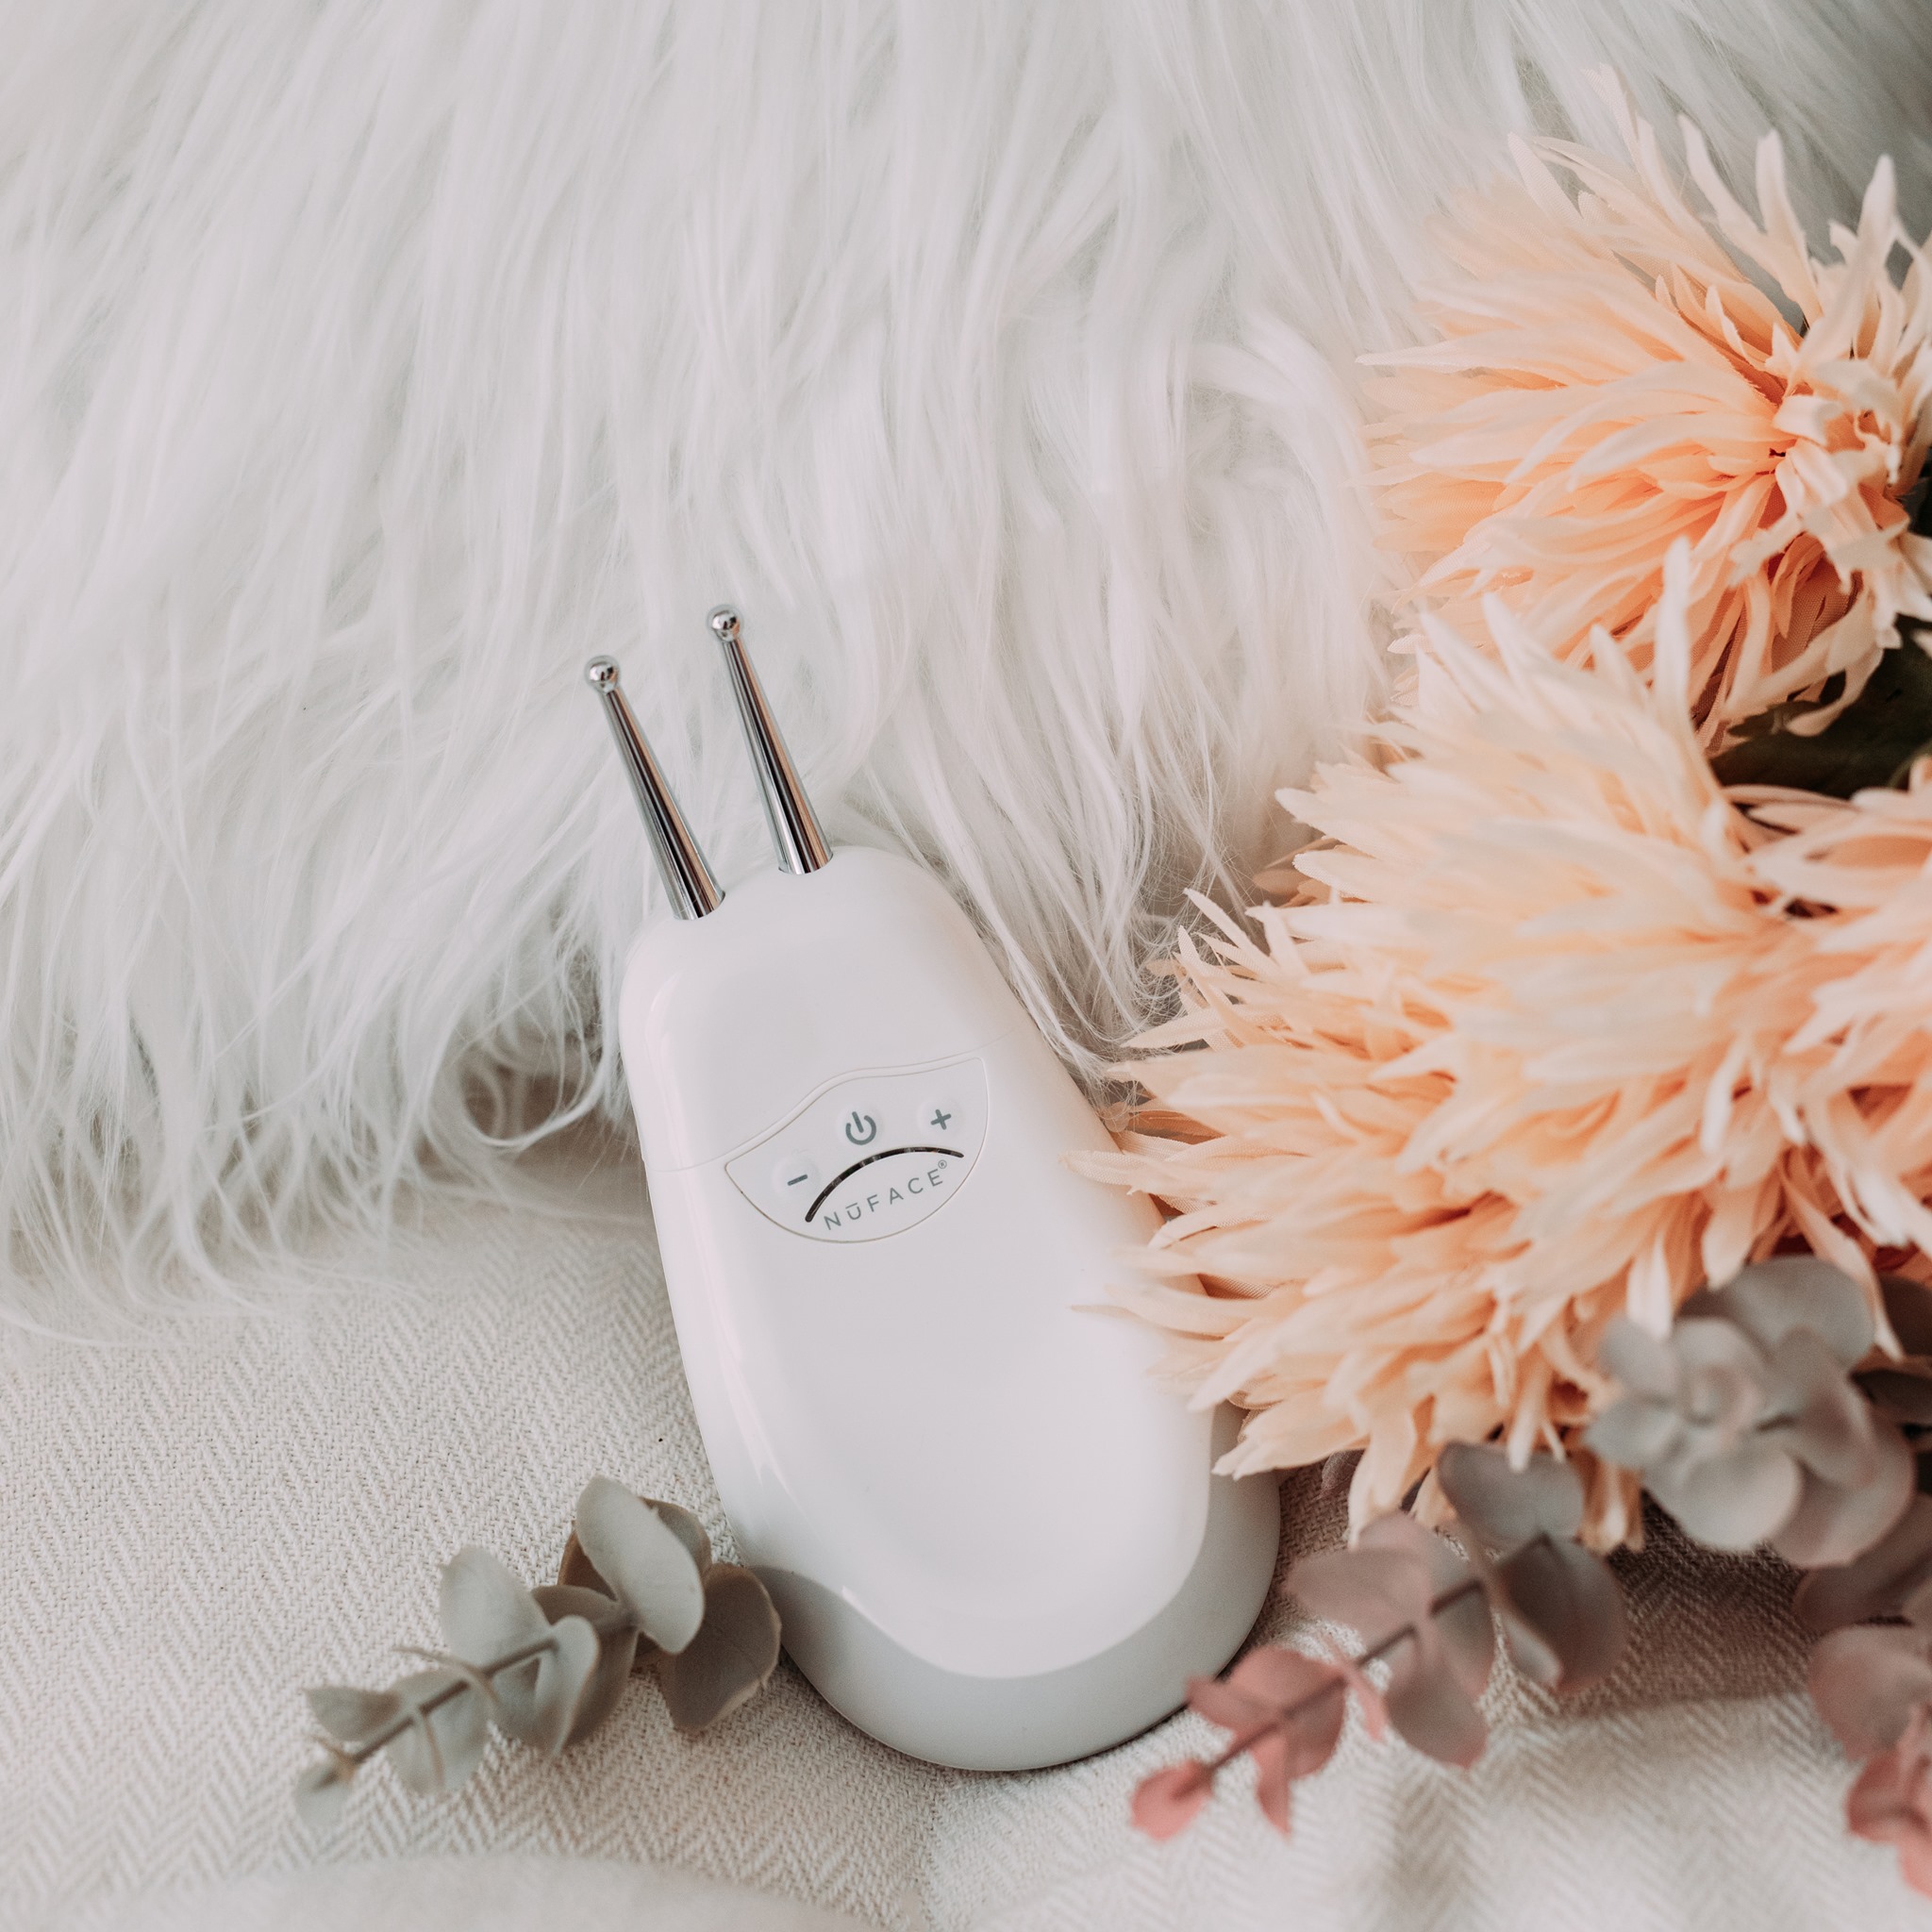 【Microcurrent: be your own face sculptor!】 With myriad beauty gadgets available in the market, it can be confusing to identify which actually works and which doesn’t